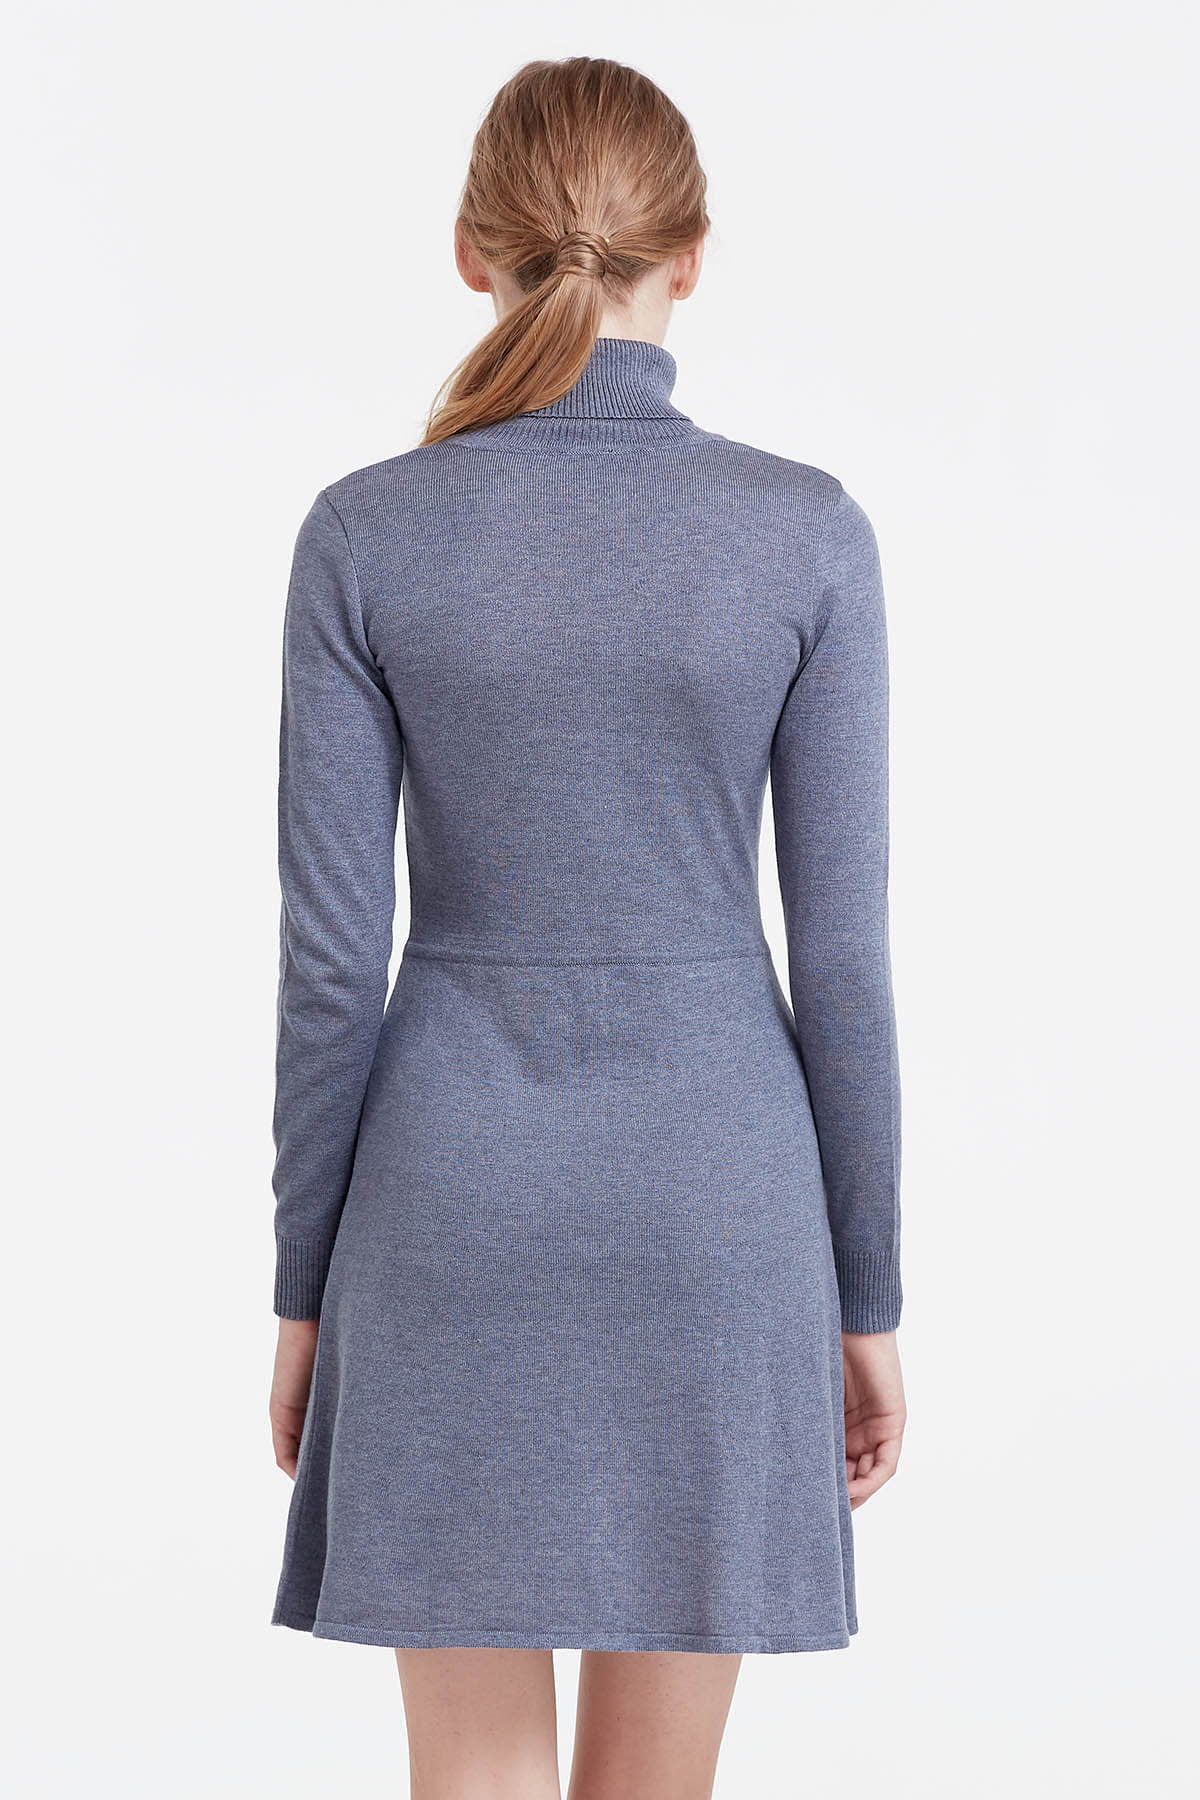 Grey knitted dress , photo 4